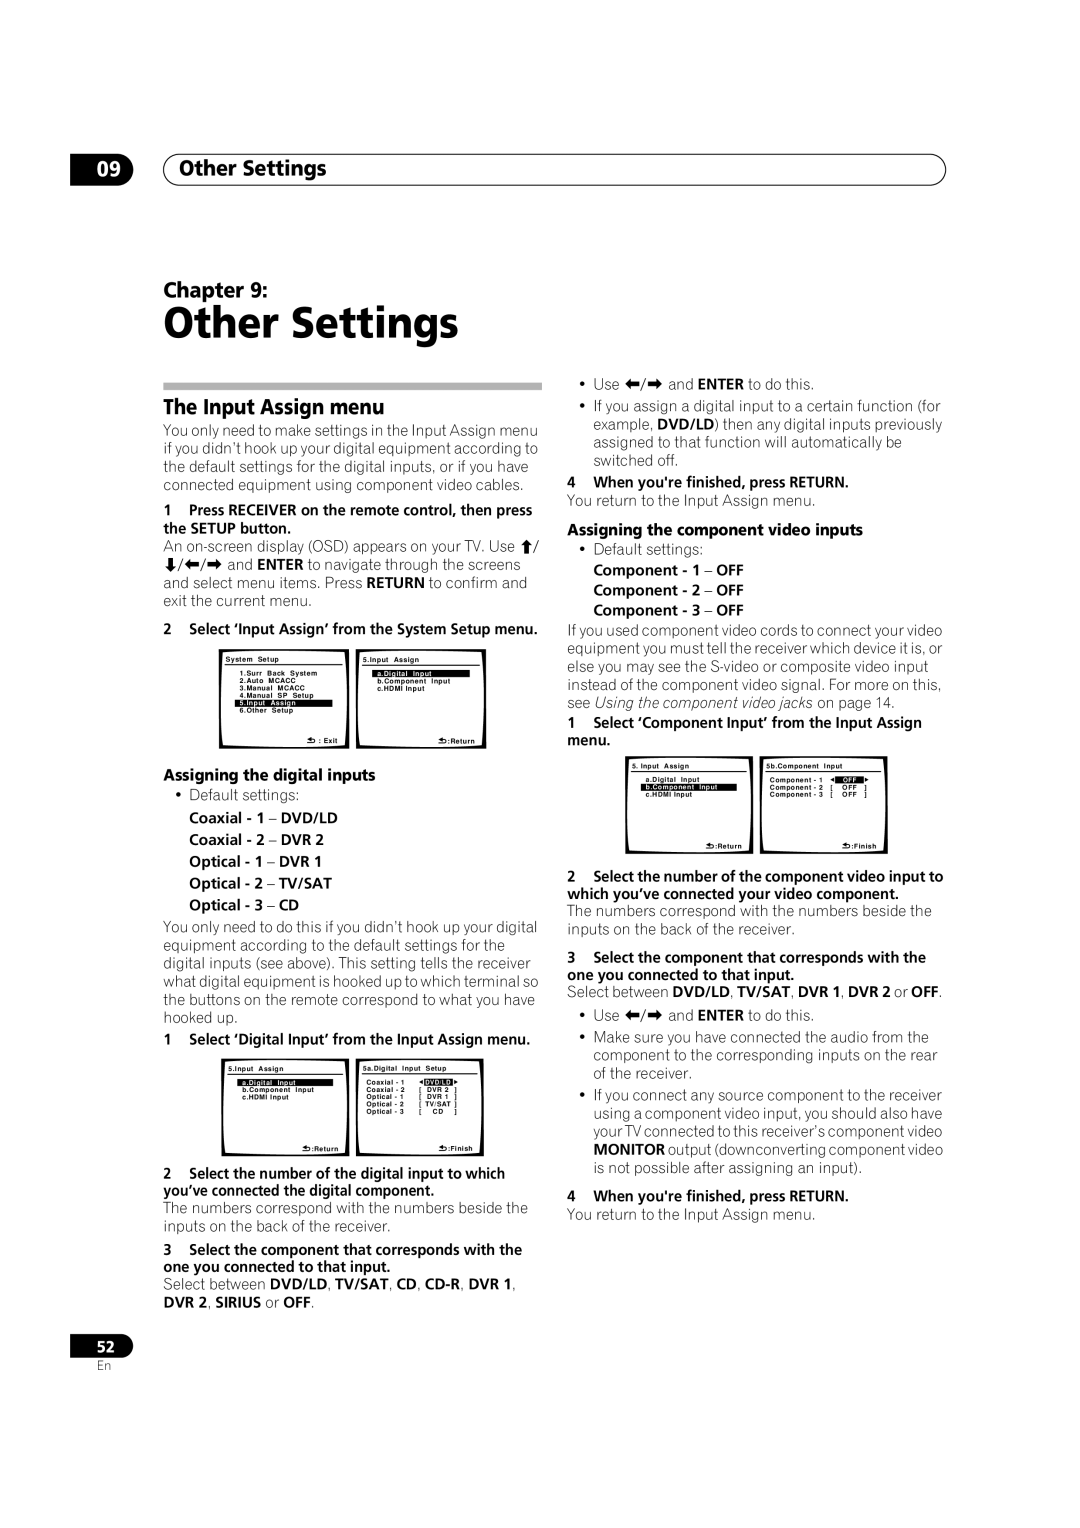 Pioneer VSX1017TXV manual 09Other Settings Chapter, The Input Assign menu, Assigning the digital inputs 